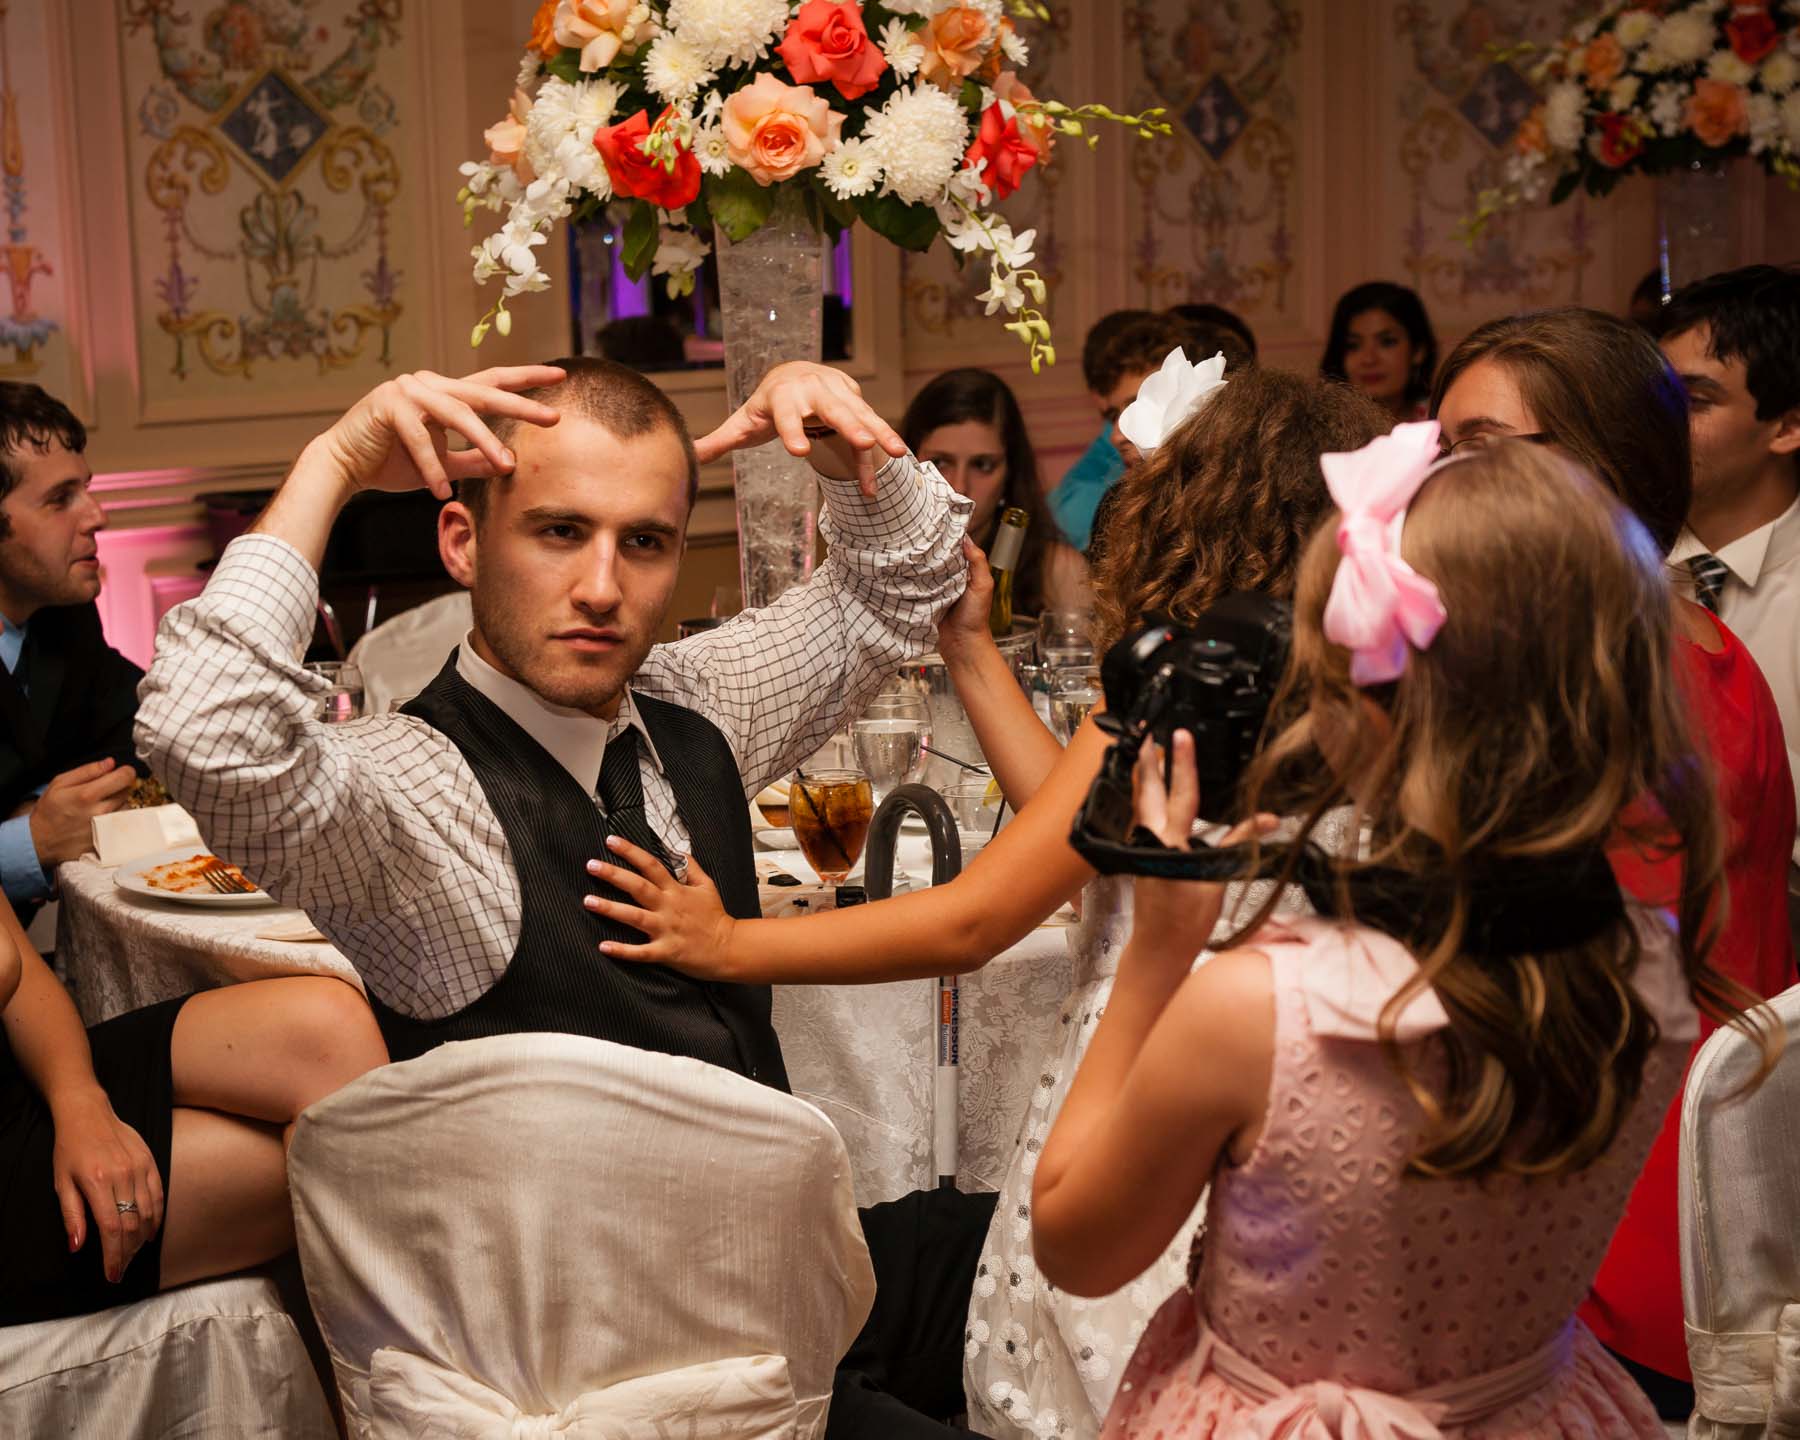 7 year old girl photographs a guest at a wedding with a full-frame DSLR Sony A900